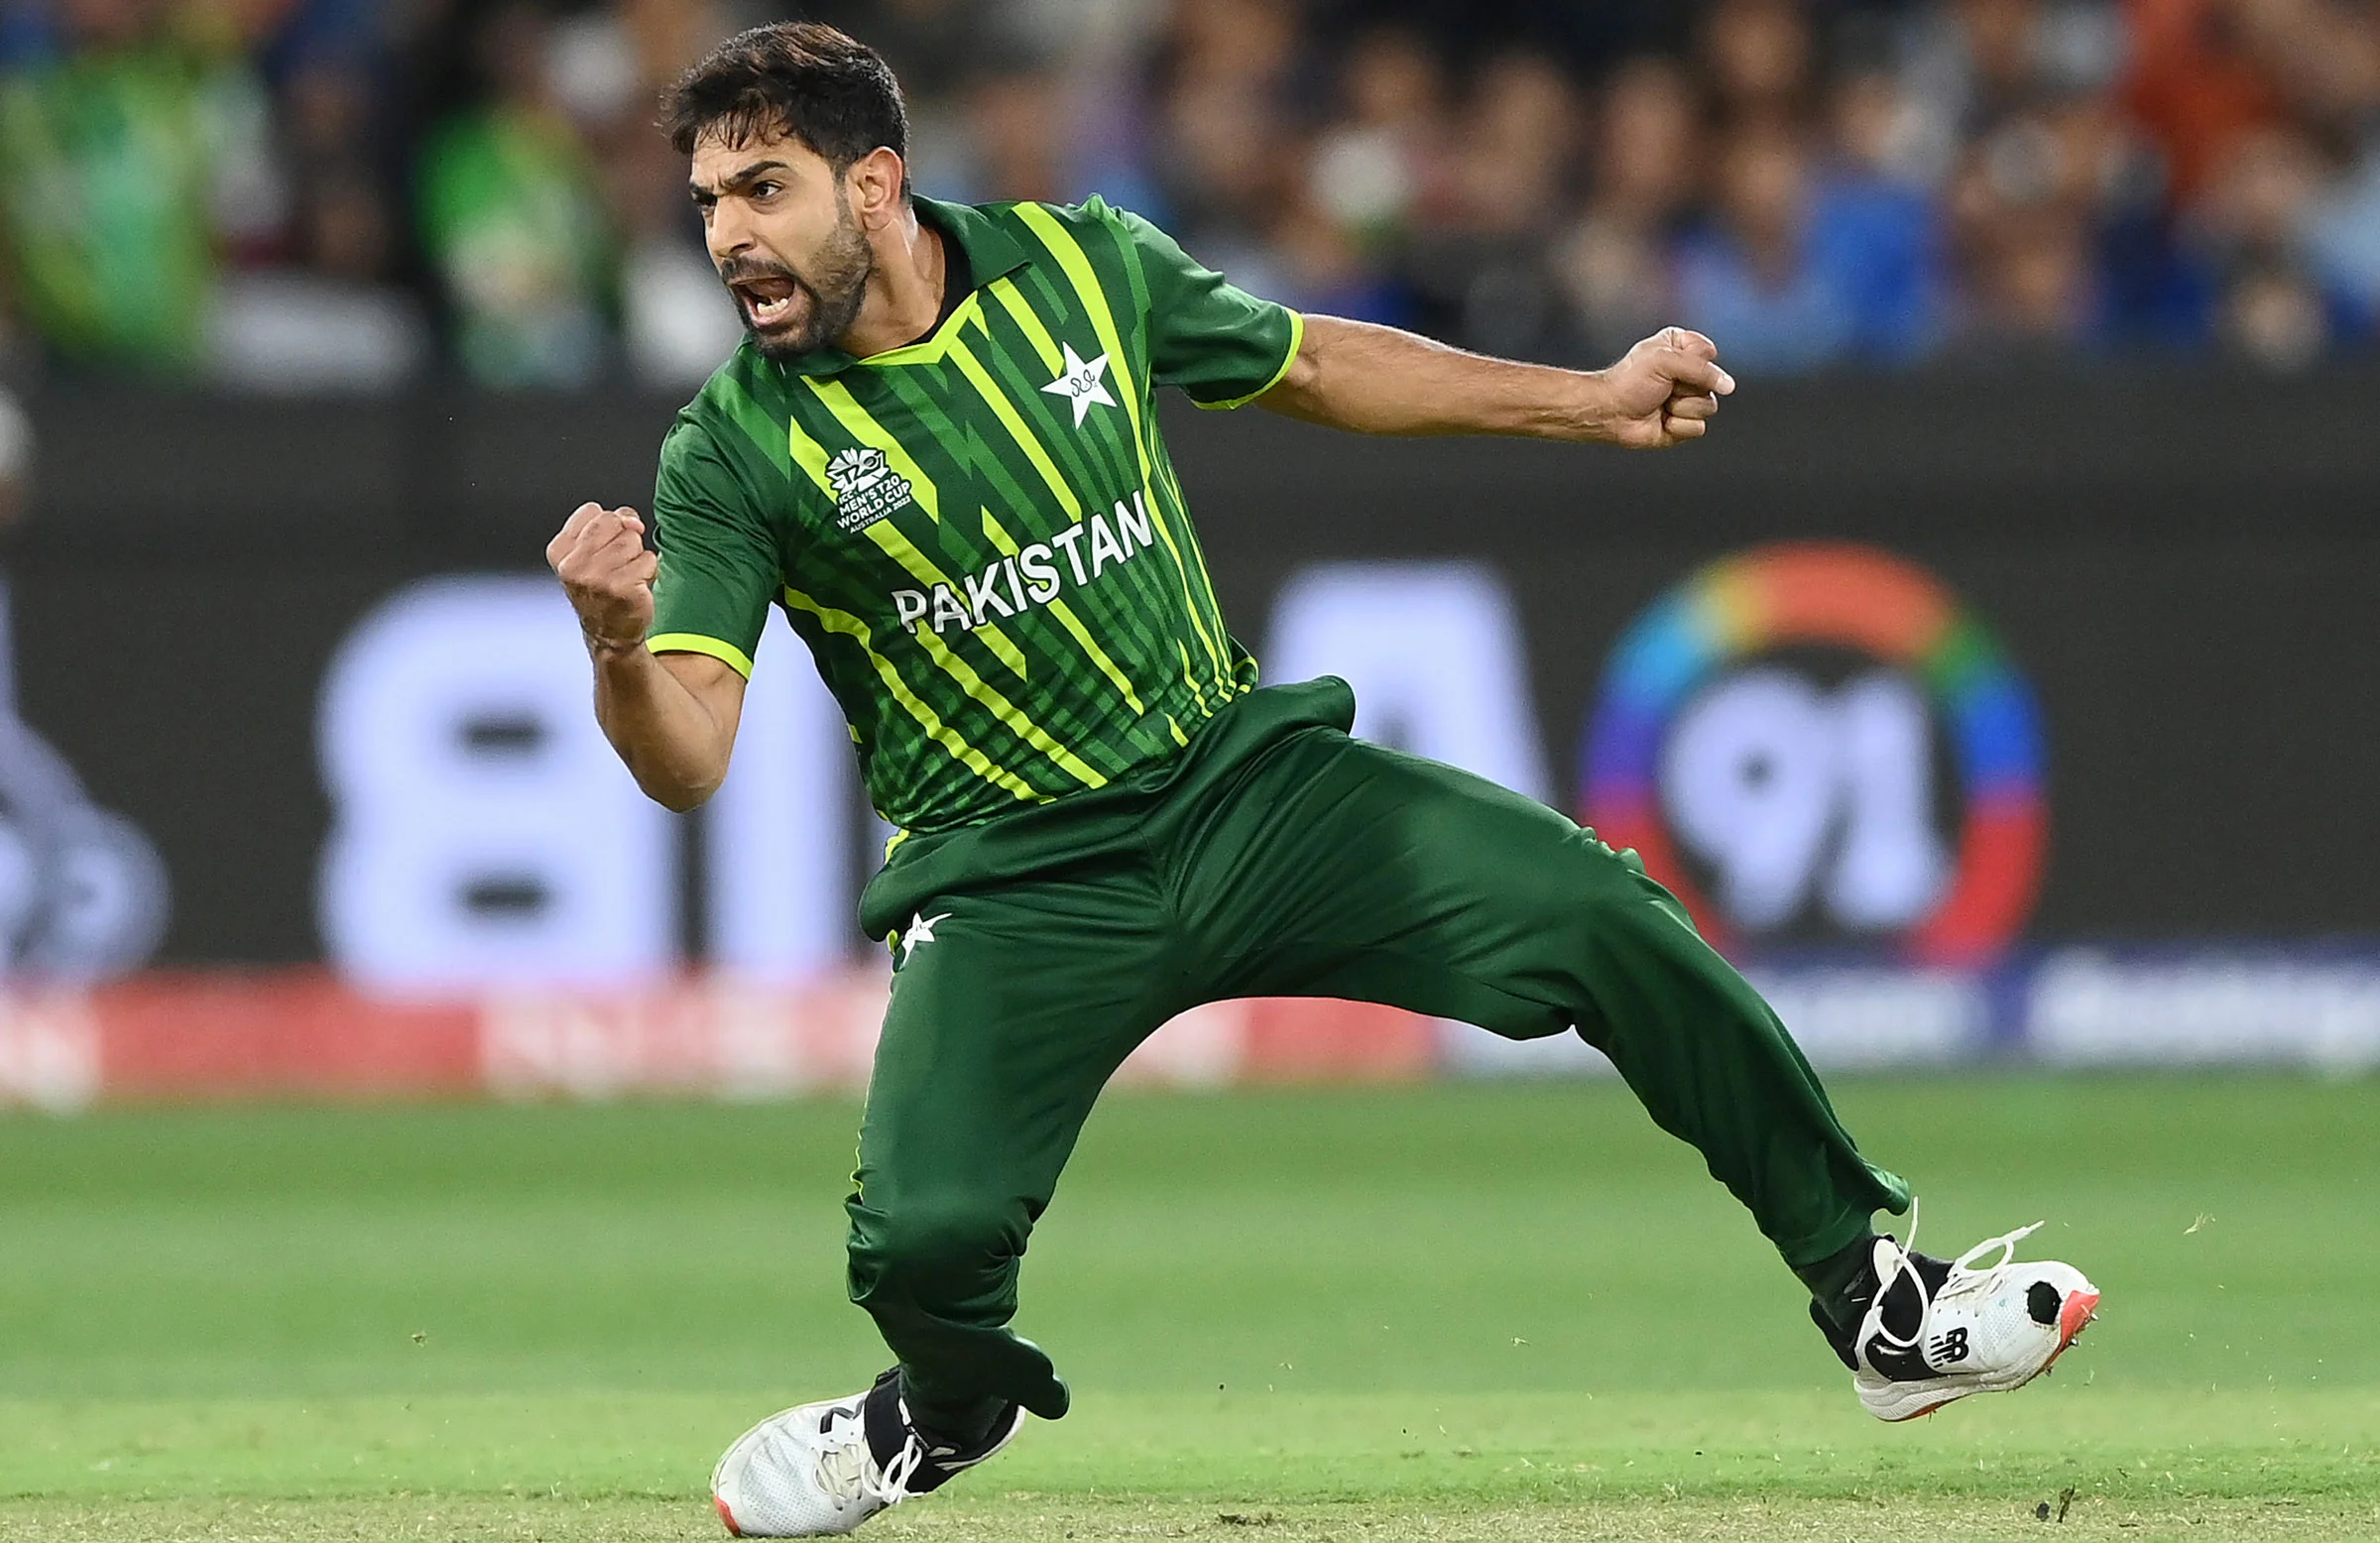 Haris Rauf Pakistan Cricket Player Height, Age, Wife, Family, Biography & More